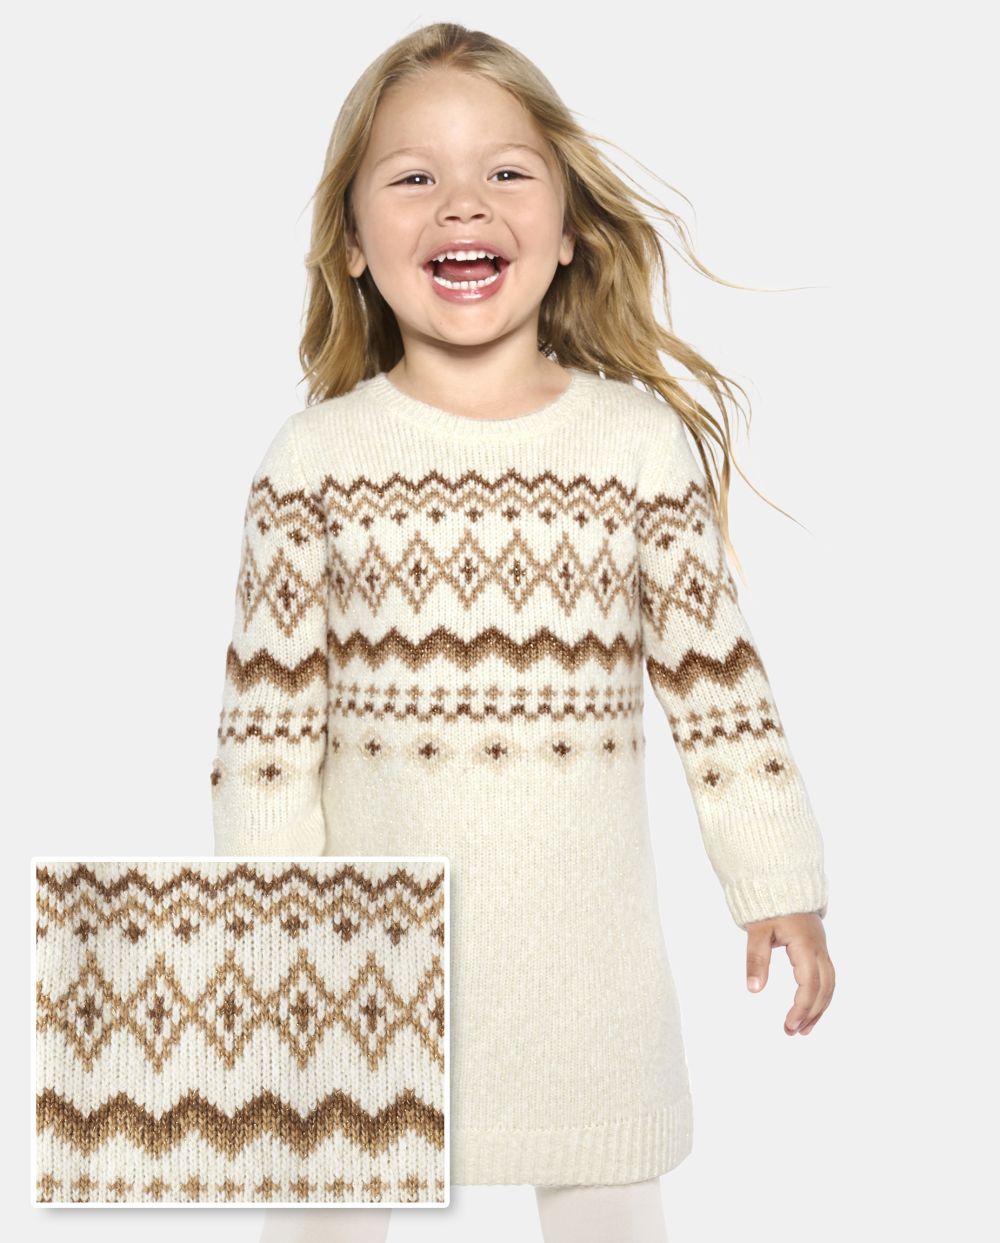 Tall Toddler Baby Above the Knee Sweater Long Sleeves Crew Neck Dress